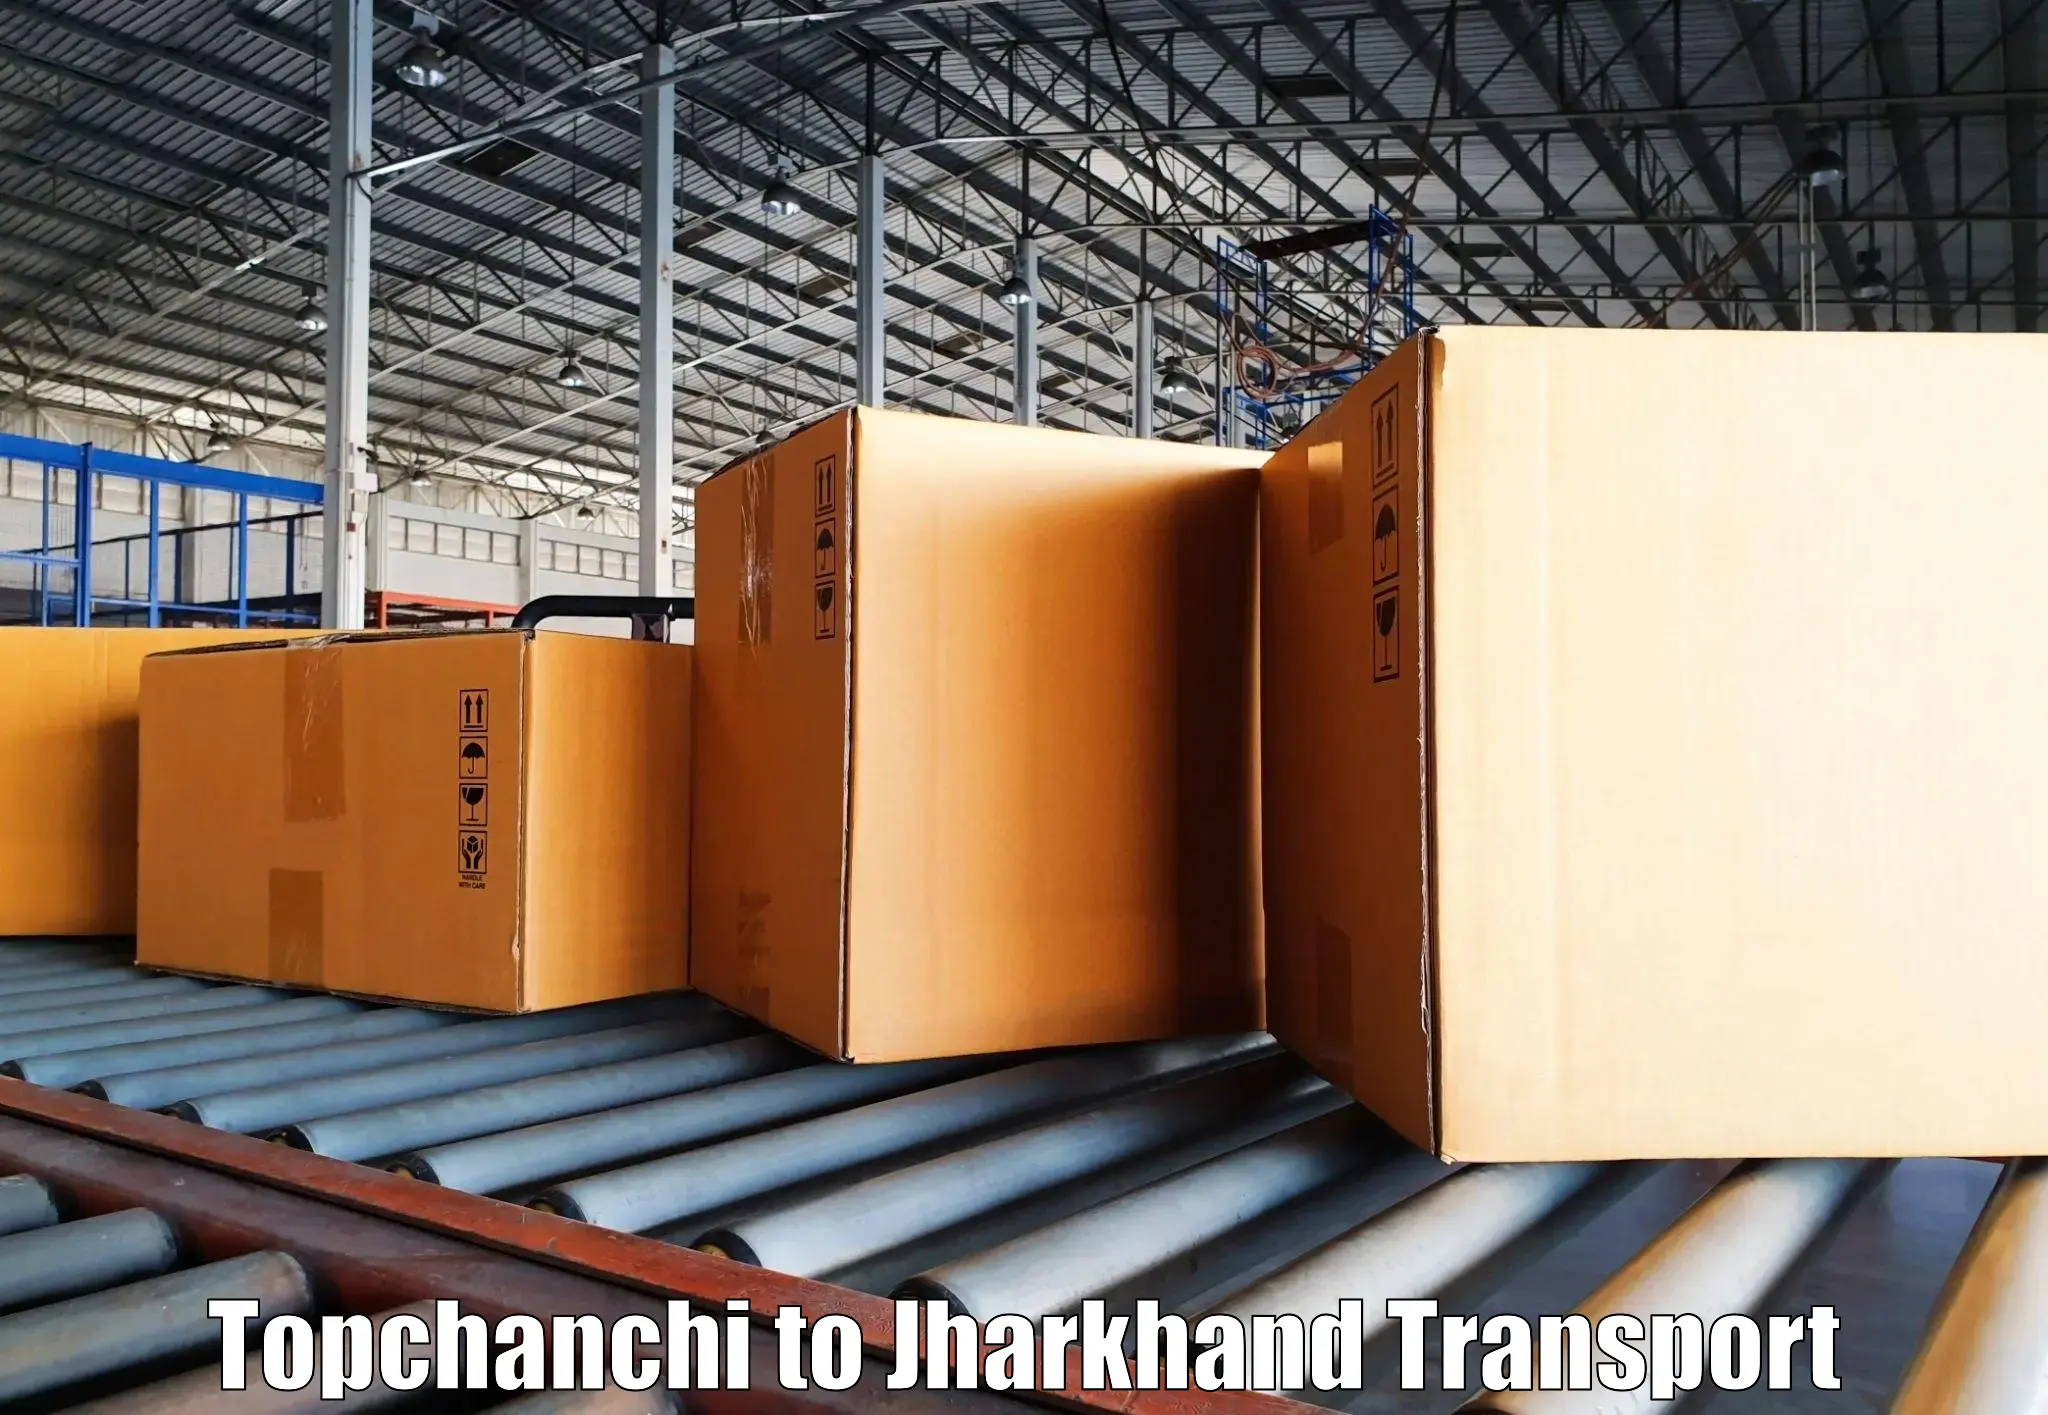 Air cargo transport services in Topchanchi to Jharkhand